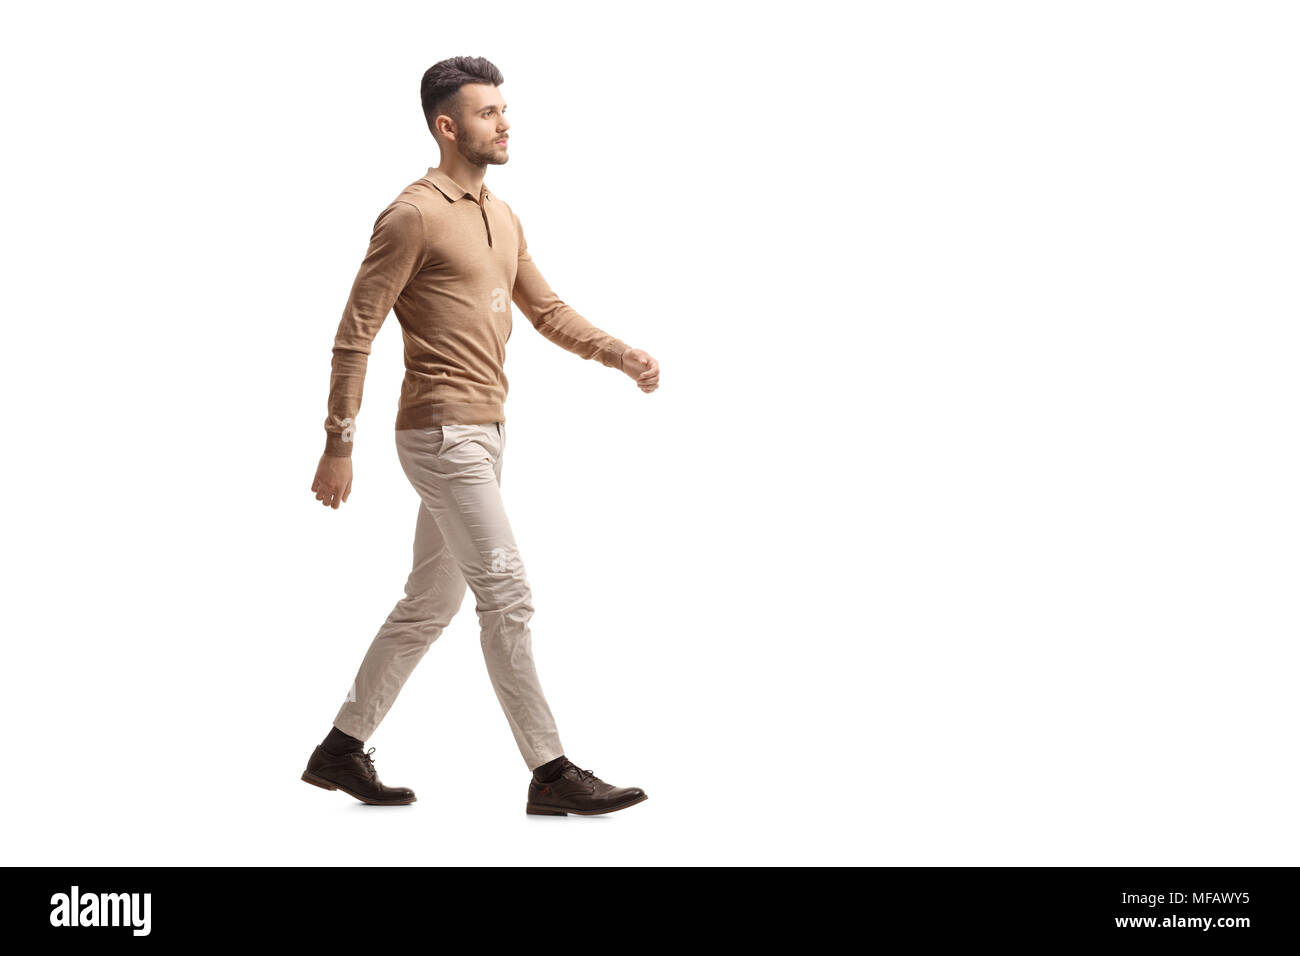 Full length profile shot of a young man walking isolated on white background Stock Photo